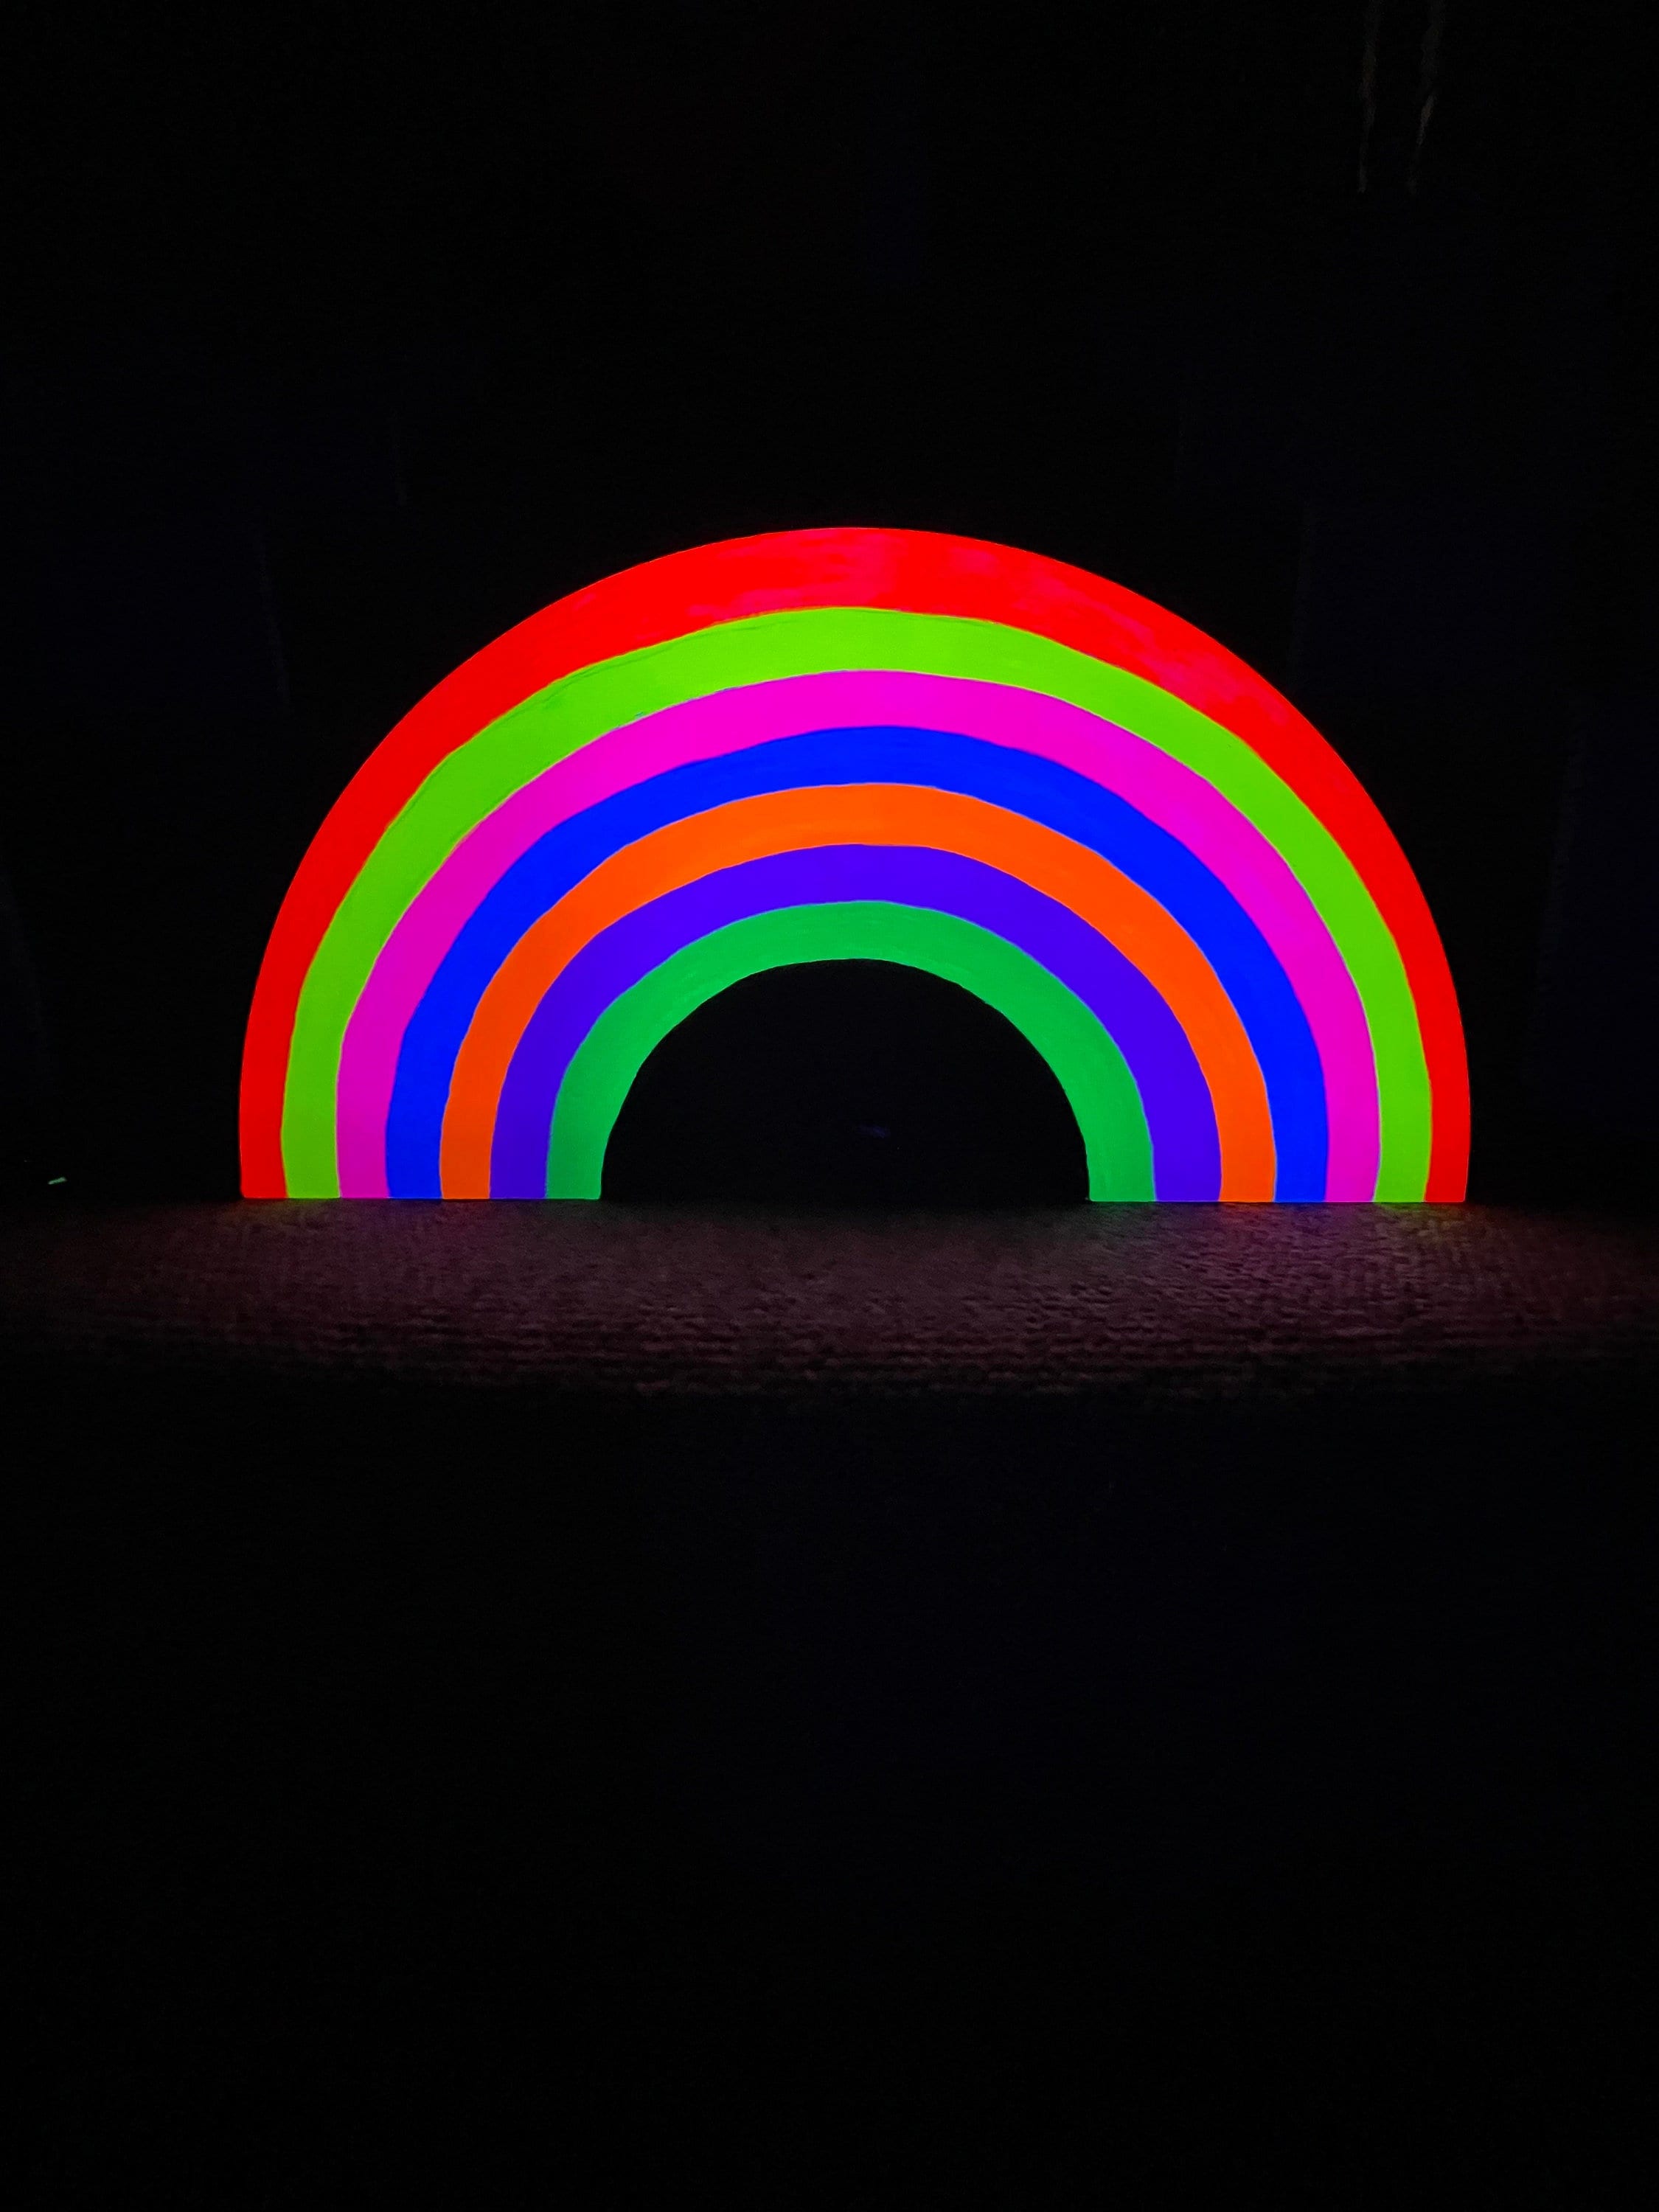 A neon rainbow sign on a black background. - Pride